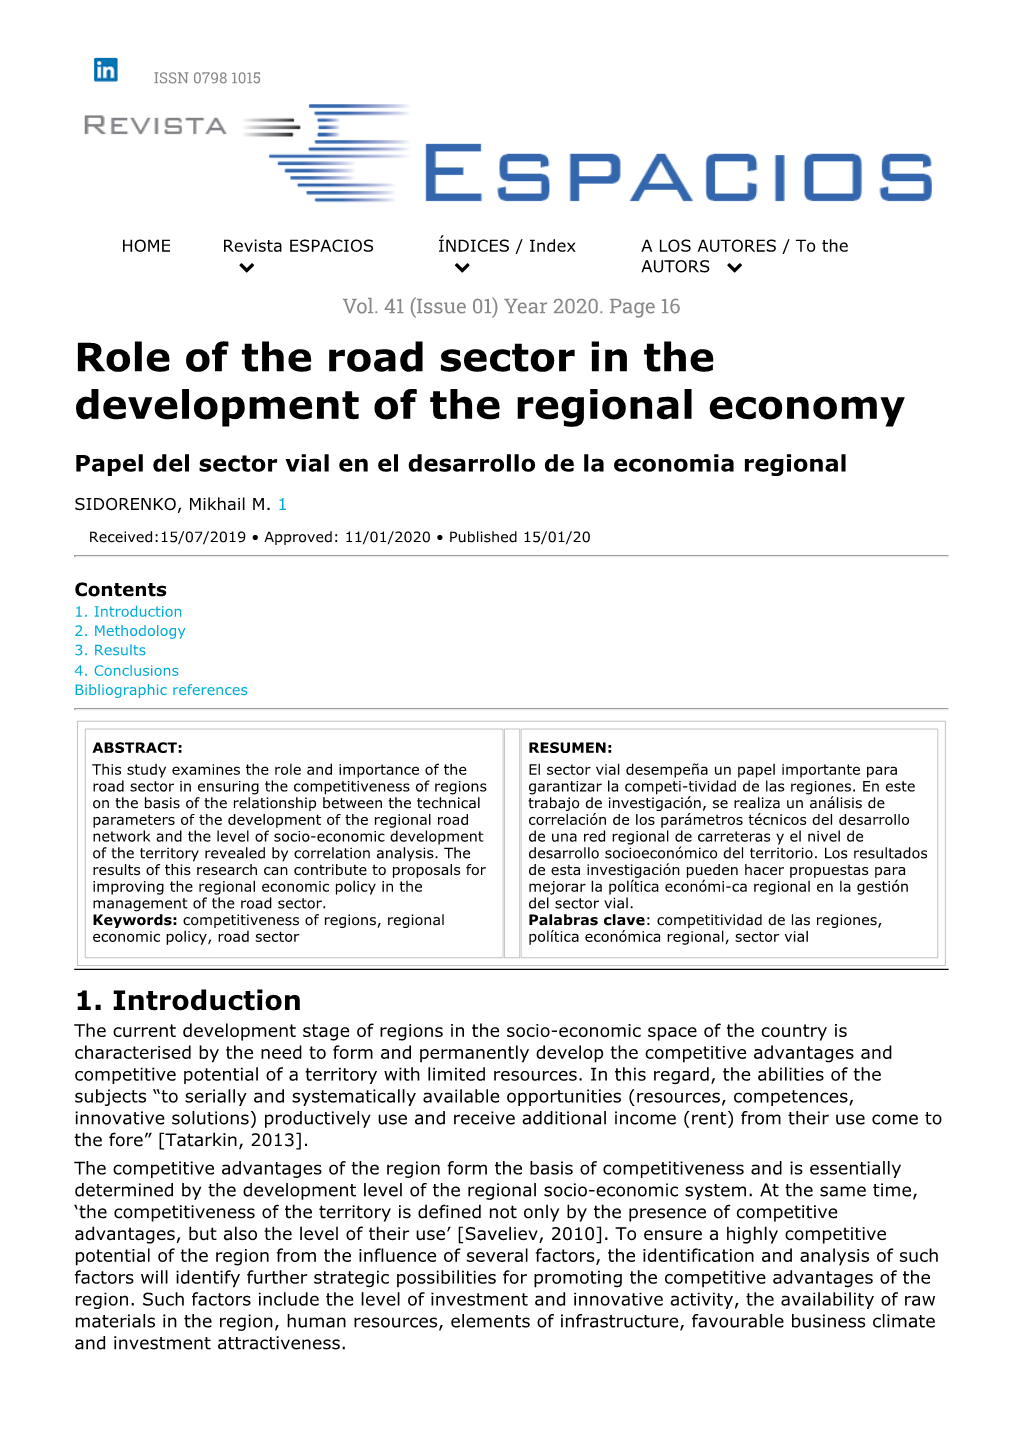 Role of the Road Sector in the Development of the Regional Economy